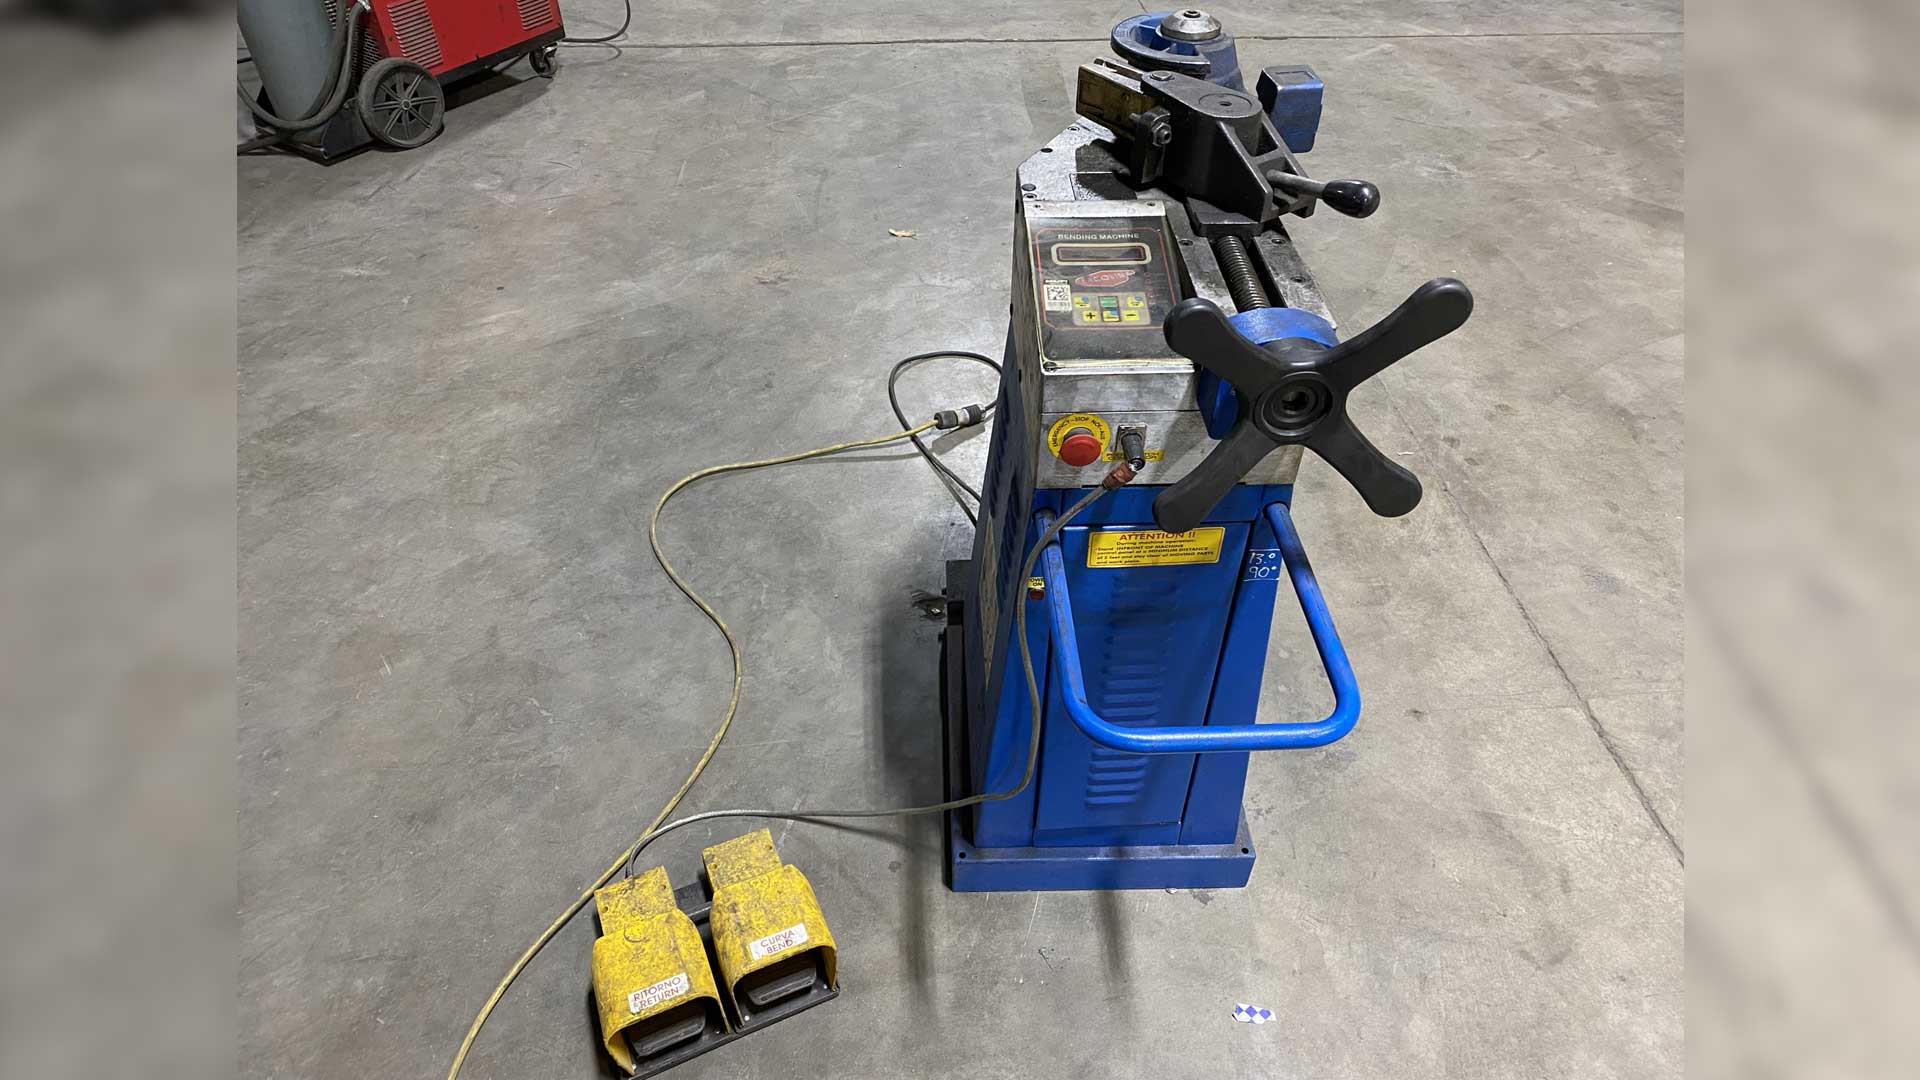 A blue Ercoline pipe bender was placed on the floor.